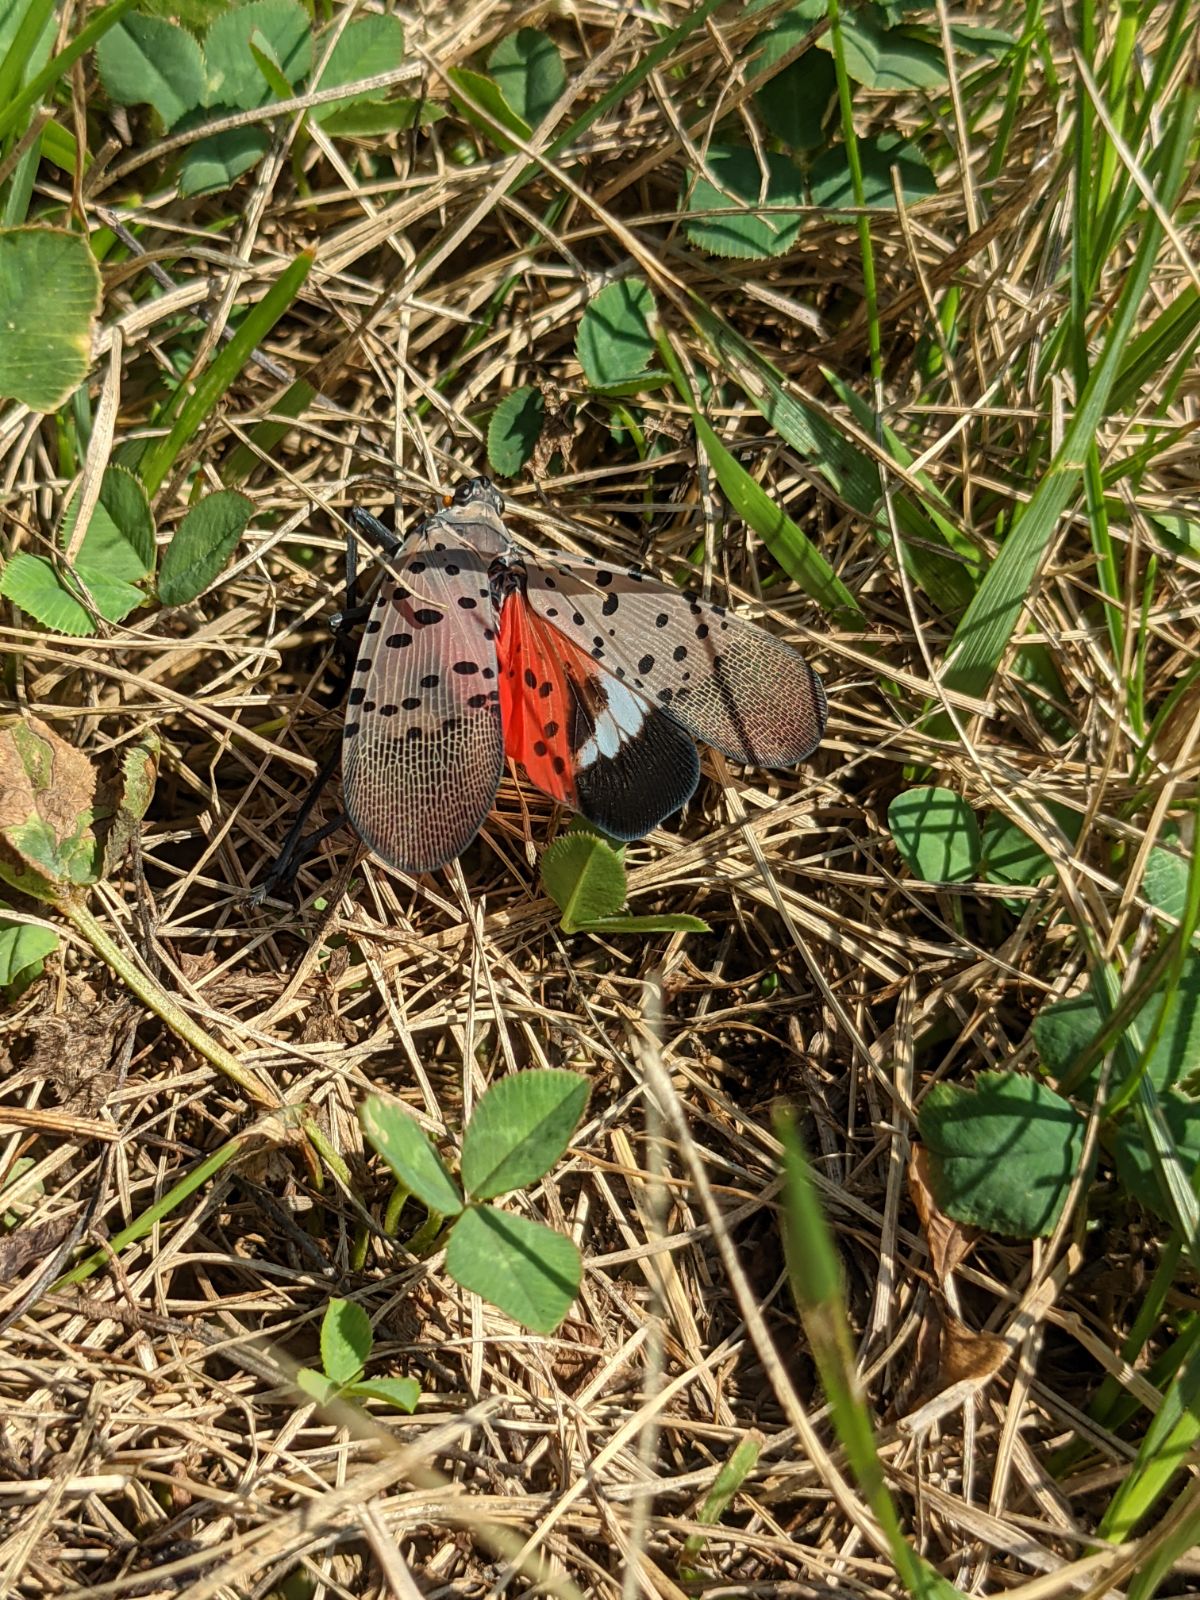 Dead spotted lanternfly smashed in the grass